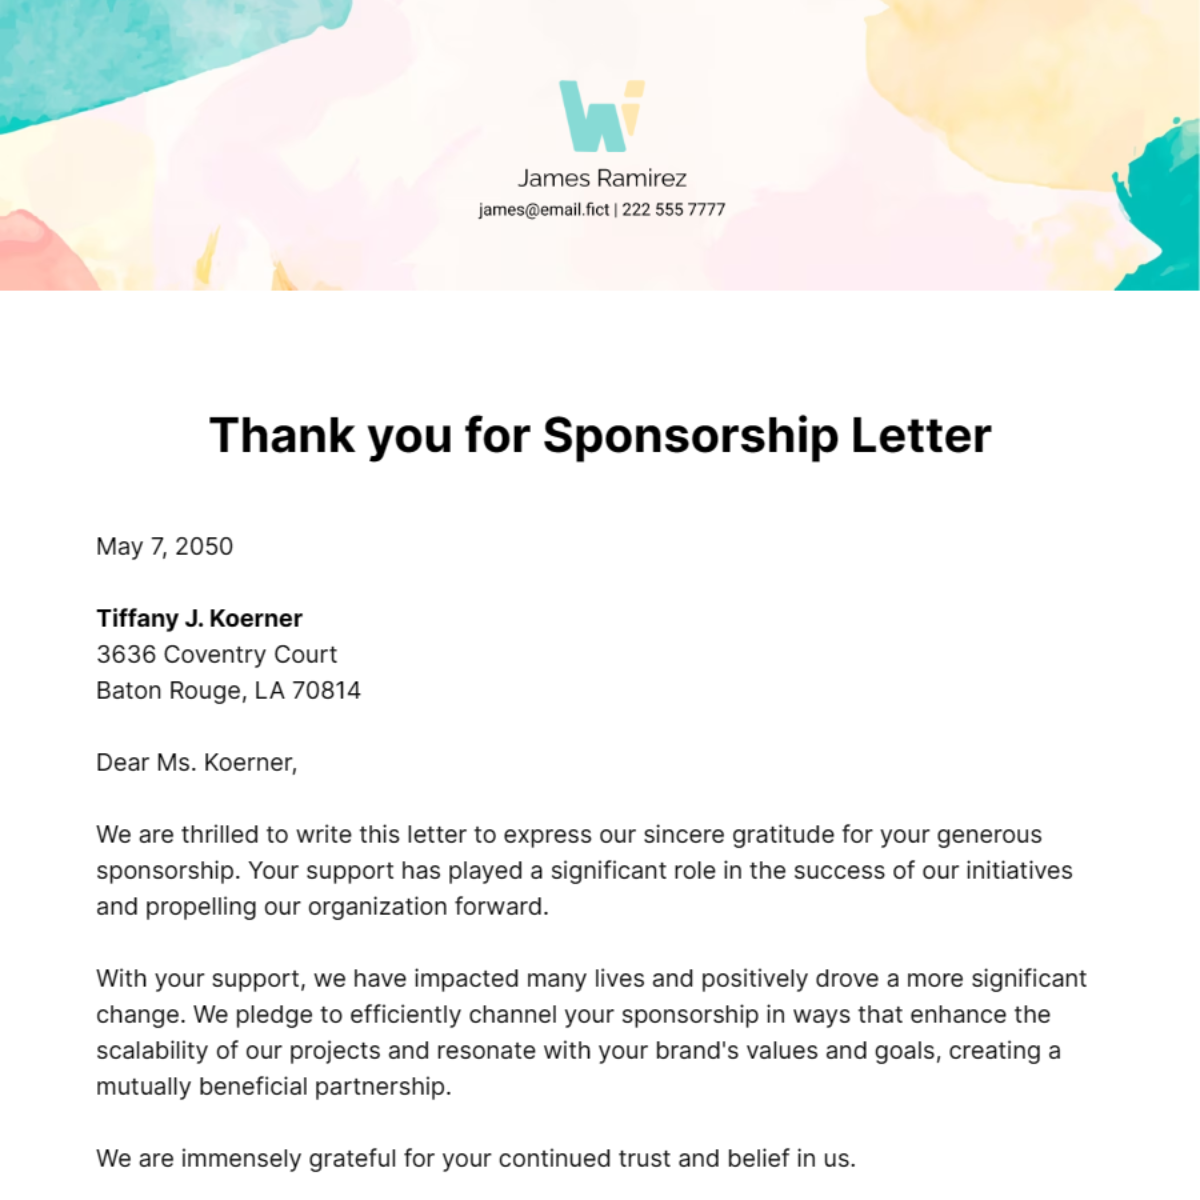 Thank you for Sponsorship Letter Template